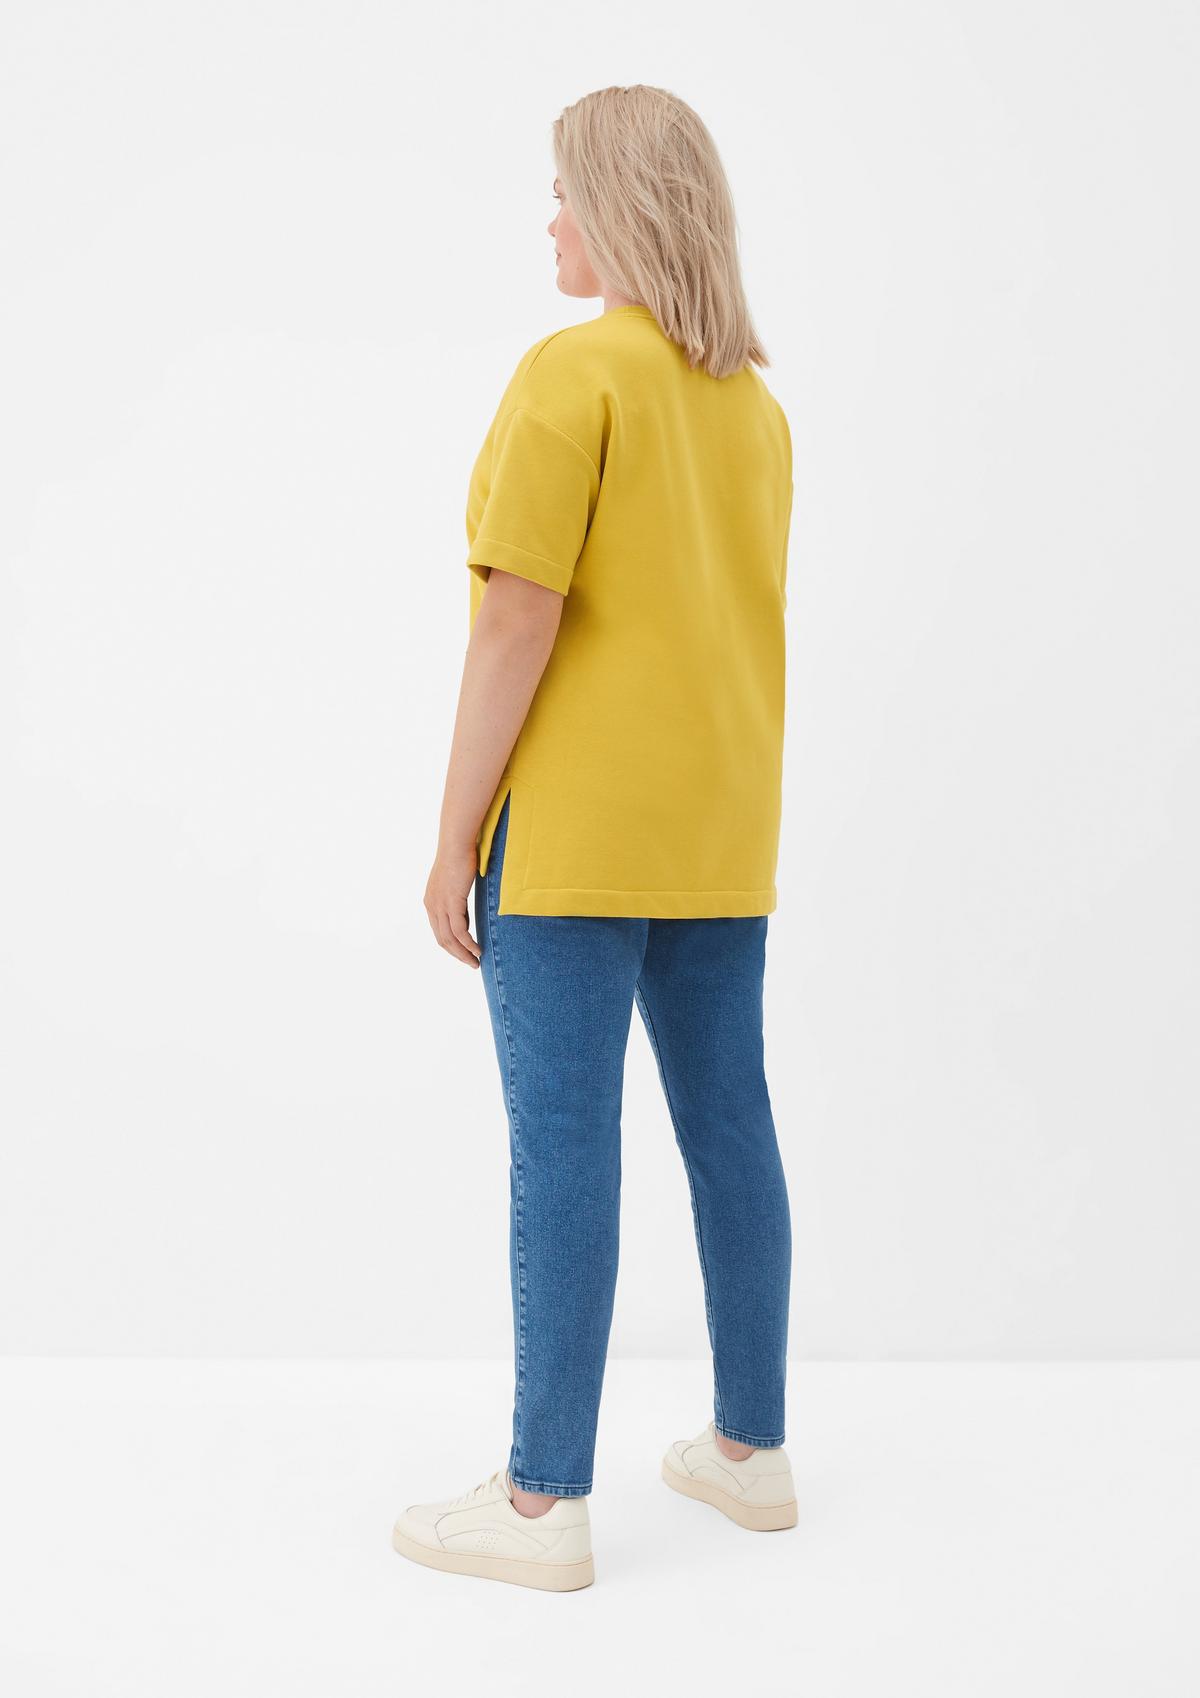 s.Oliver Sweatshirt with short sleeves